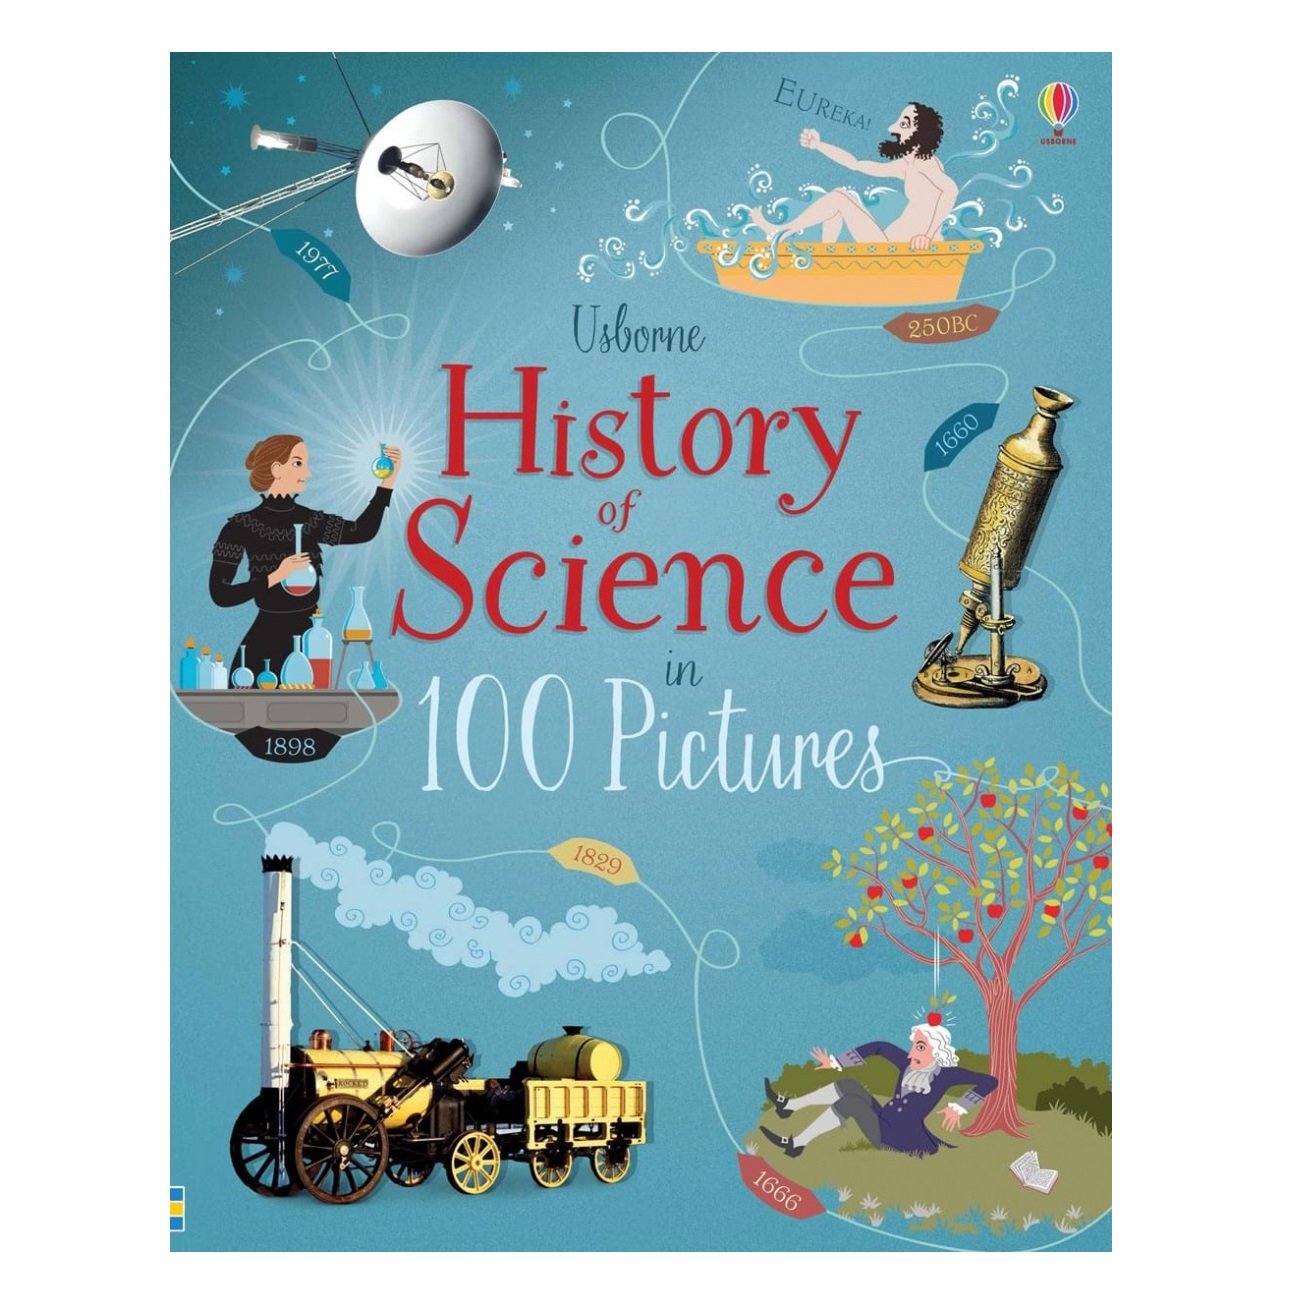 History of Science in 100 Pictures - Abigail Wheatley, англ. язык (9781474948227) - фото 1